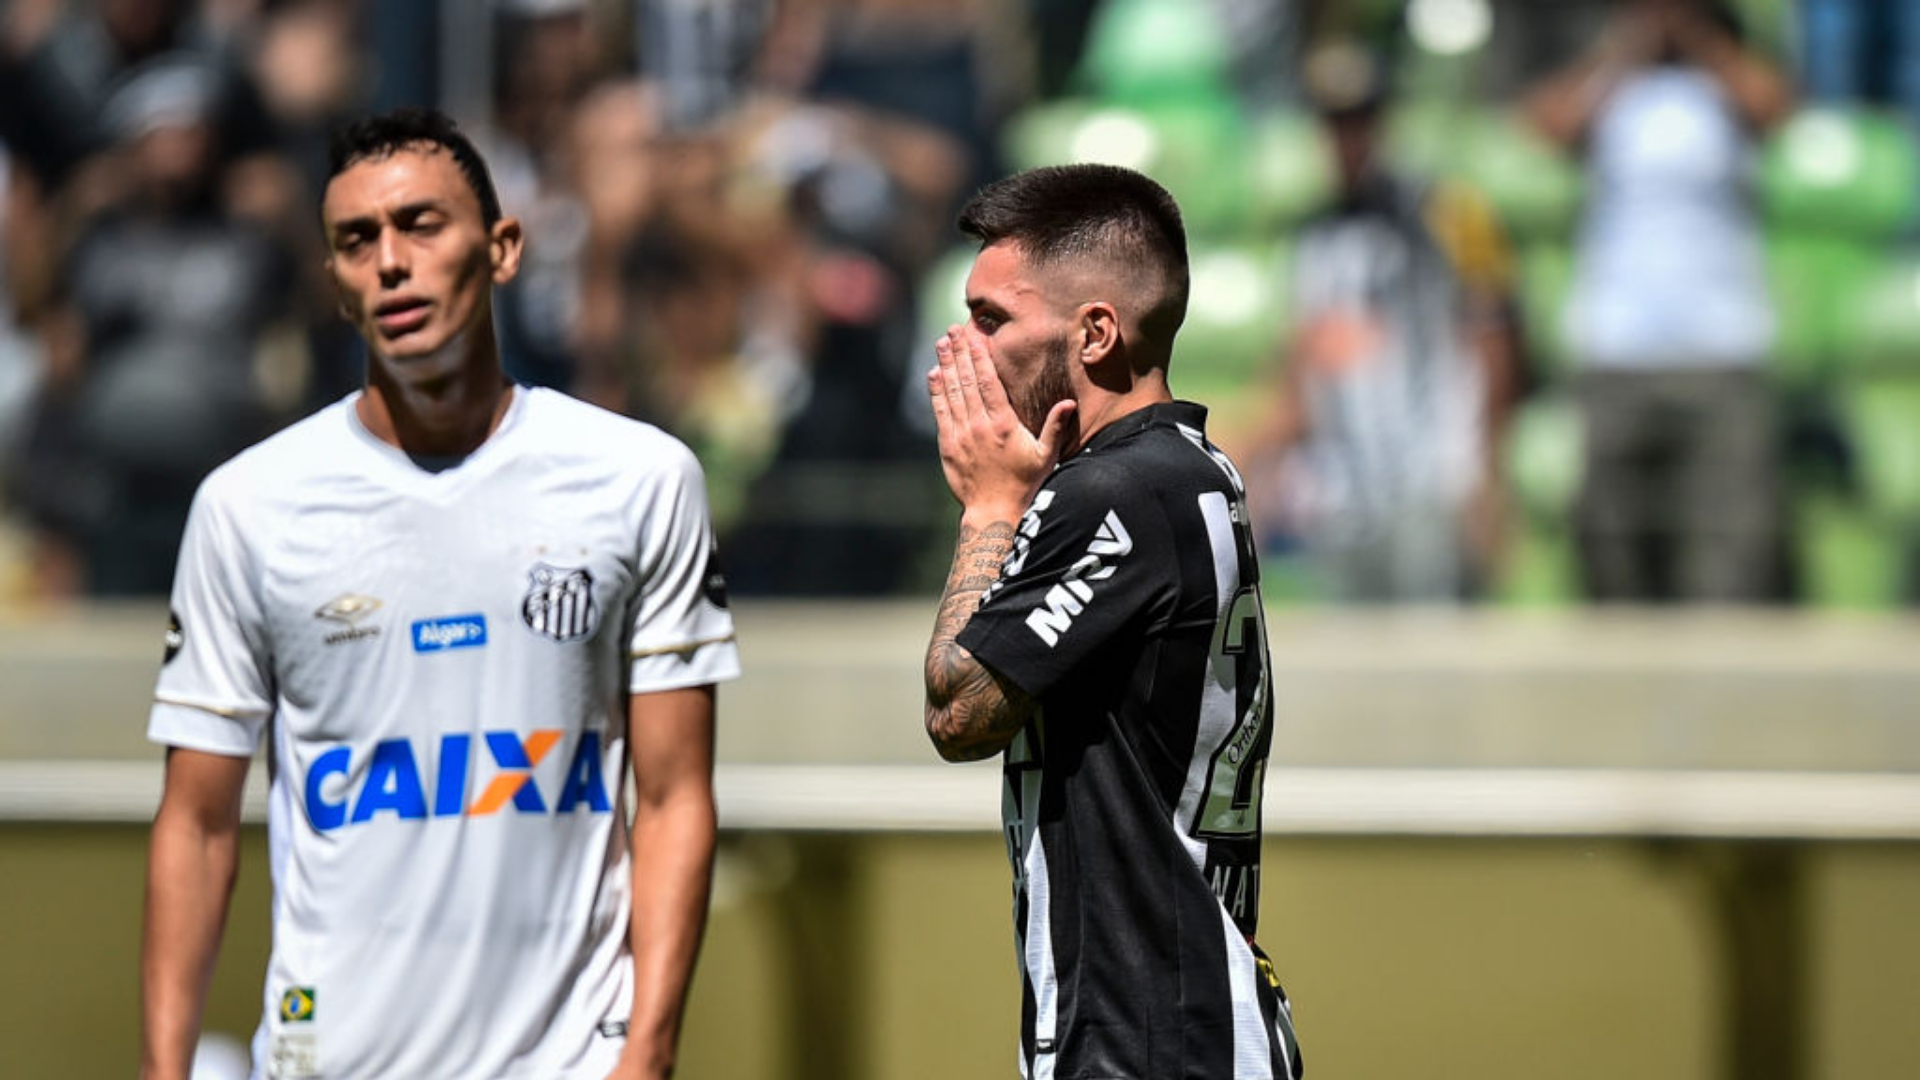 Sportbuzz Santos loses space to Fluminense and midfielder Atlético-MG is far behind